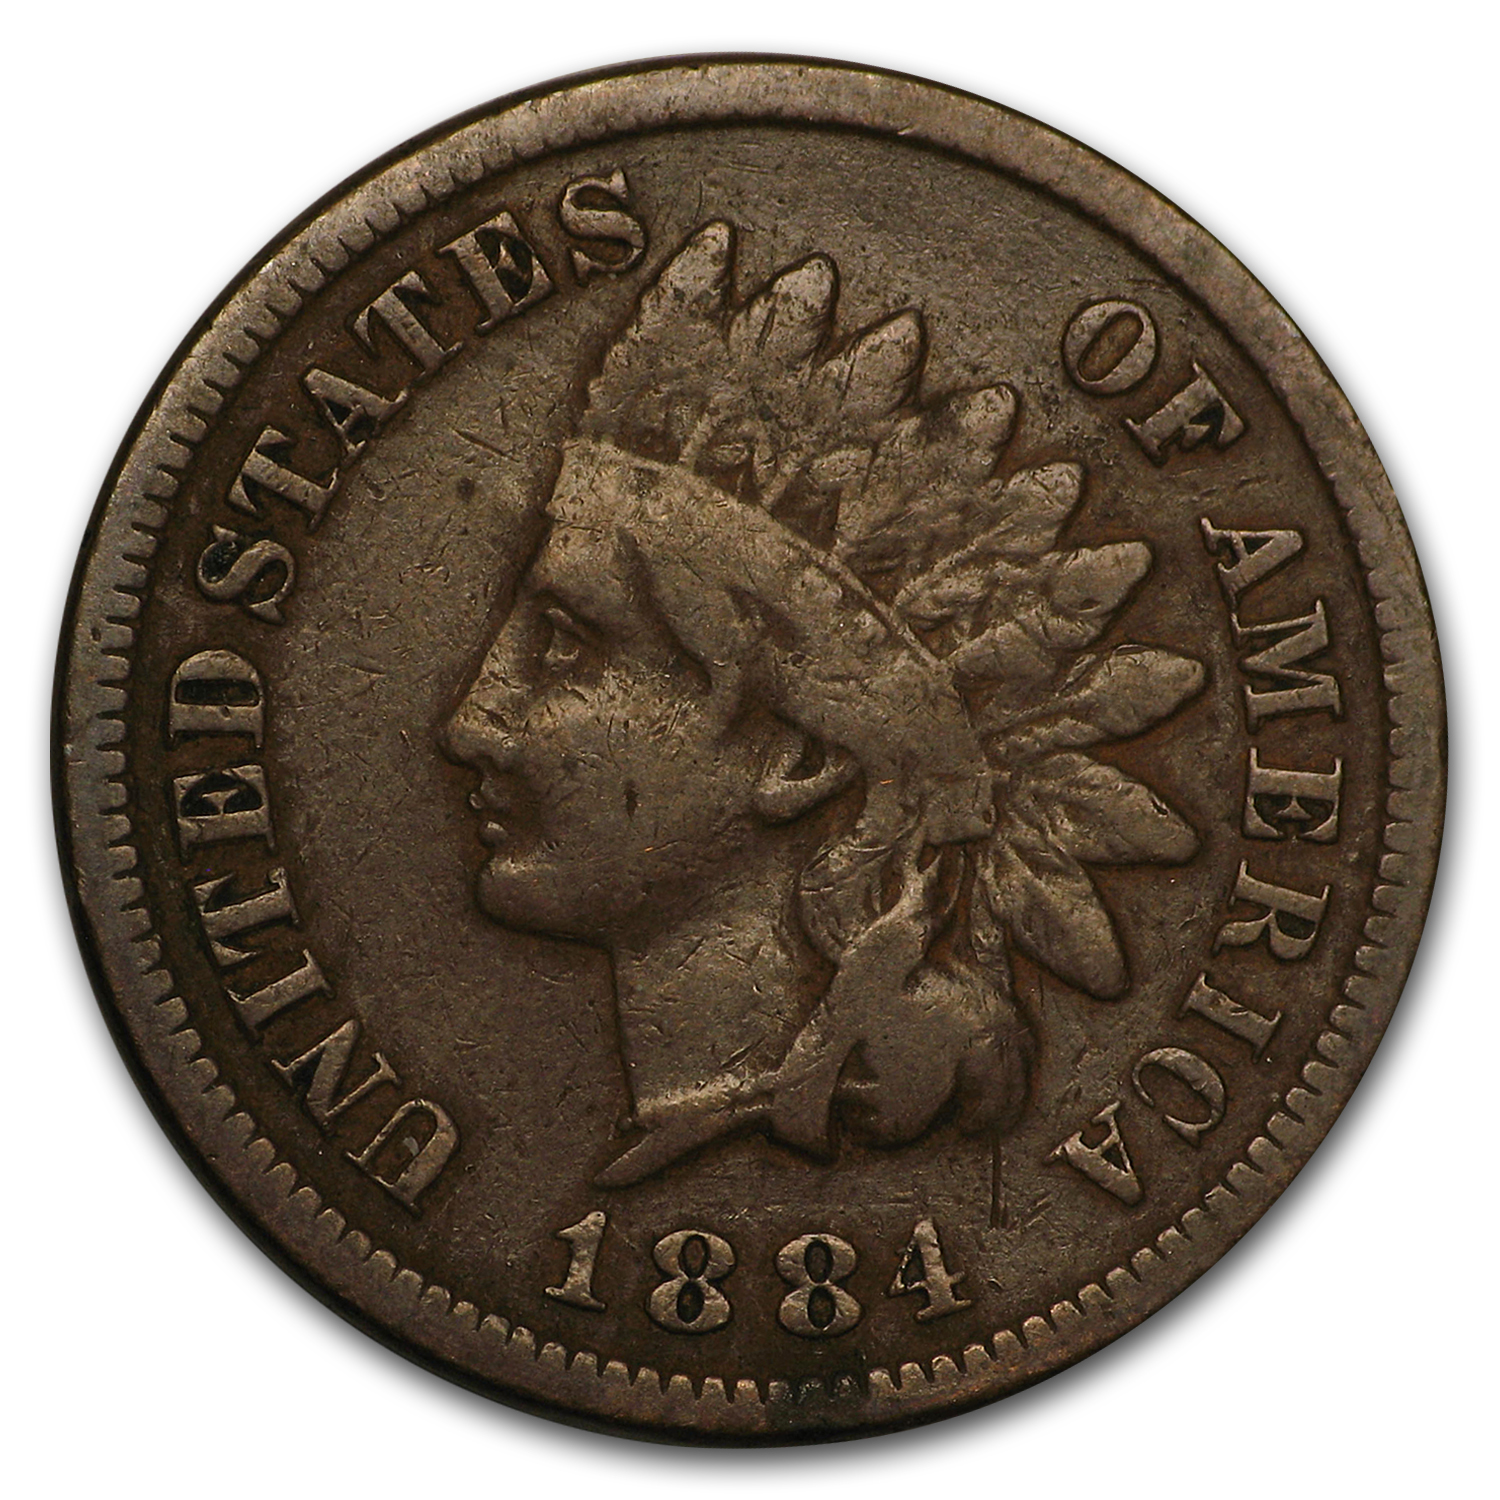 Buy 1884 Indian Head Cent Fine